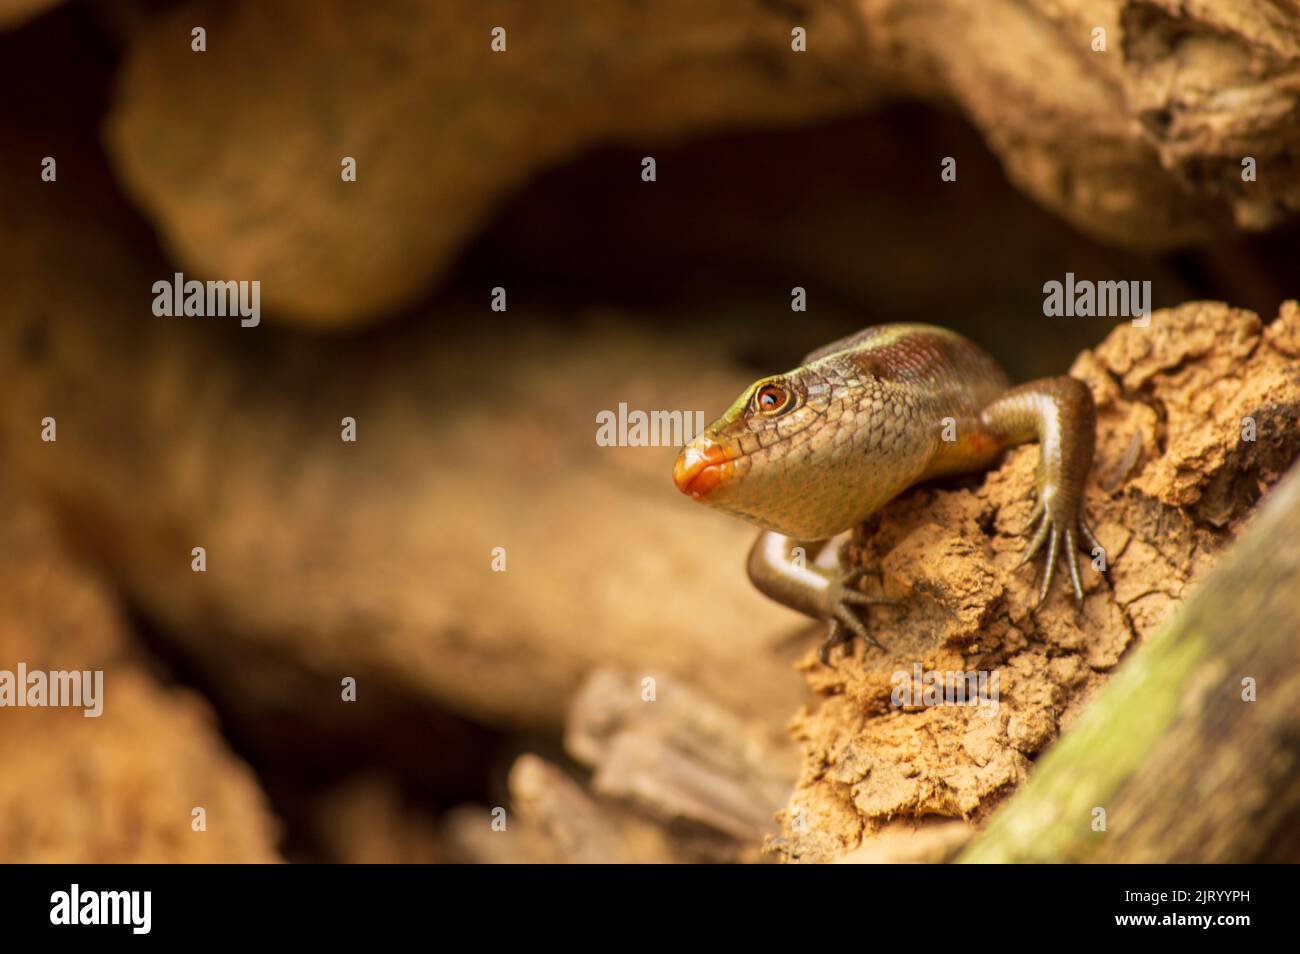 Lizards are a widespread group of reptiles which are cold blooded animals. Here is a lizard on with forming a beautiful background. Stock Photo